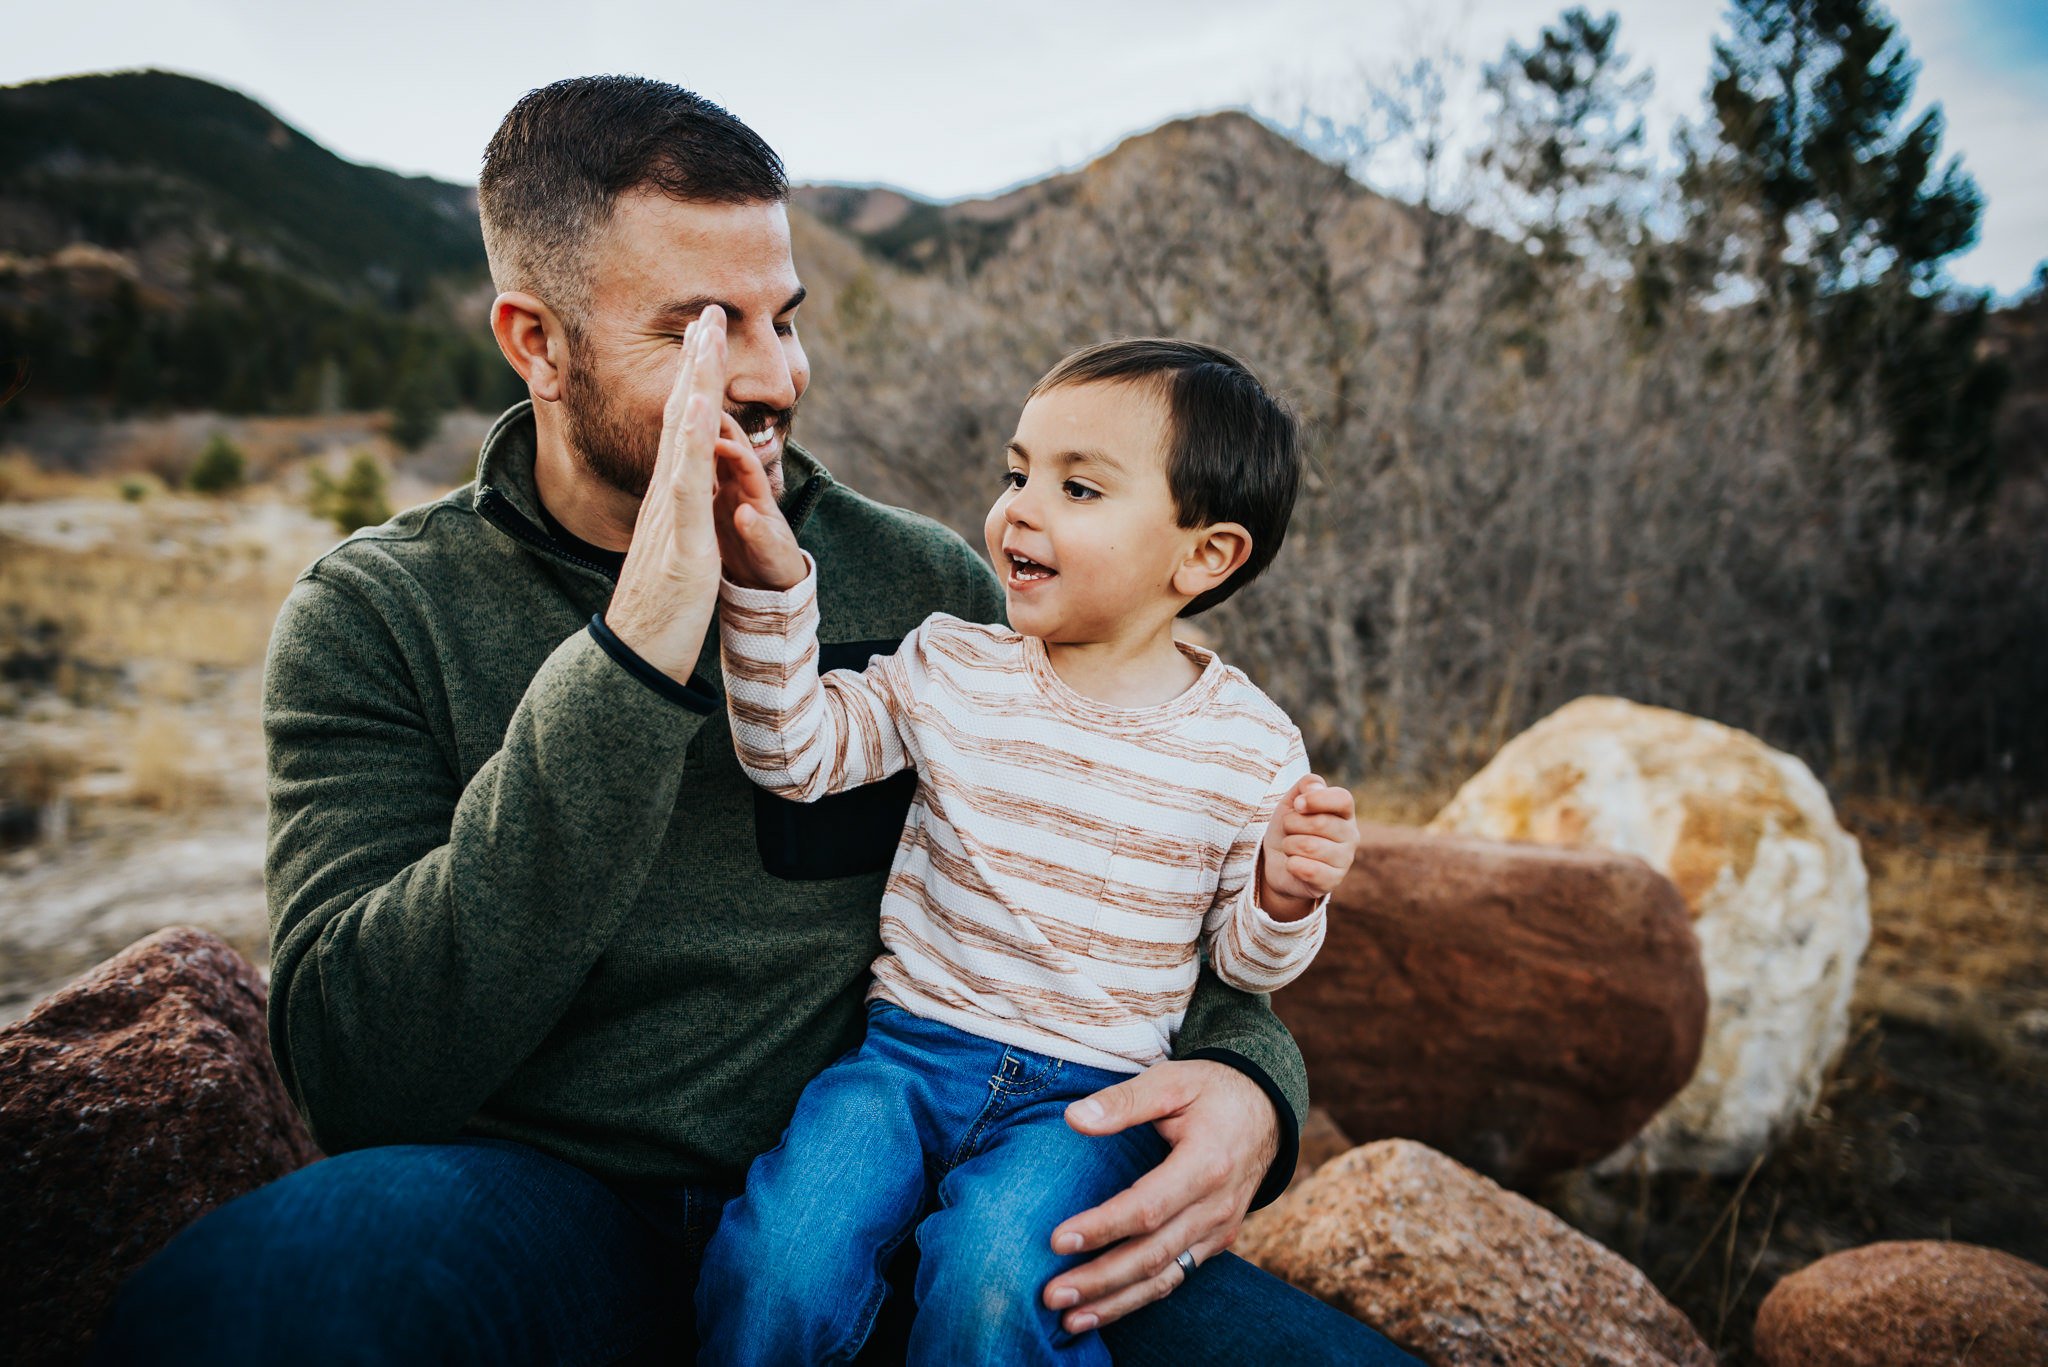 Kimberly Martinez-Gladin Family Session Colorado Springs Colorado Photographer Blodgett Peak Open Space Sunset Mountain View Mother Father Son Daughter Wild Prairie Photography-4-2020.jpg